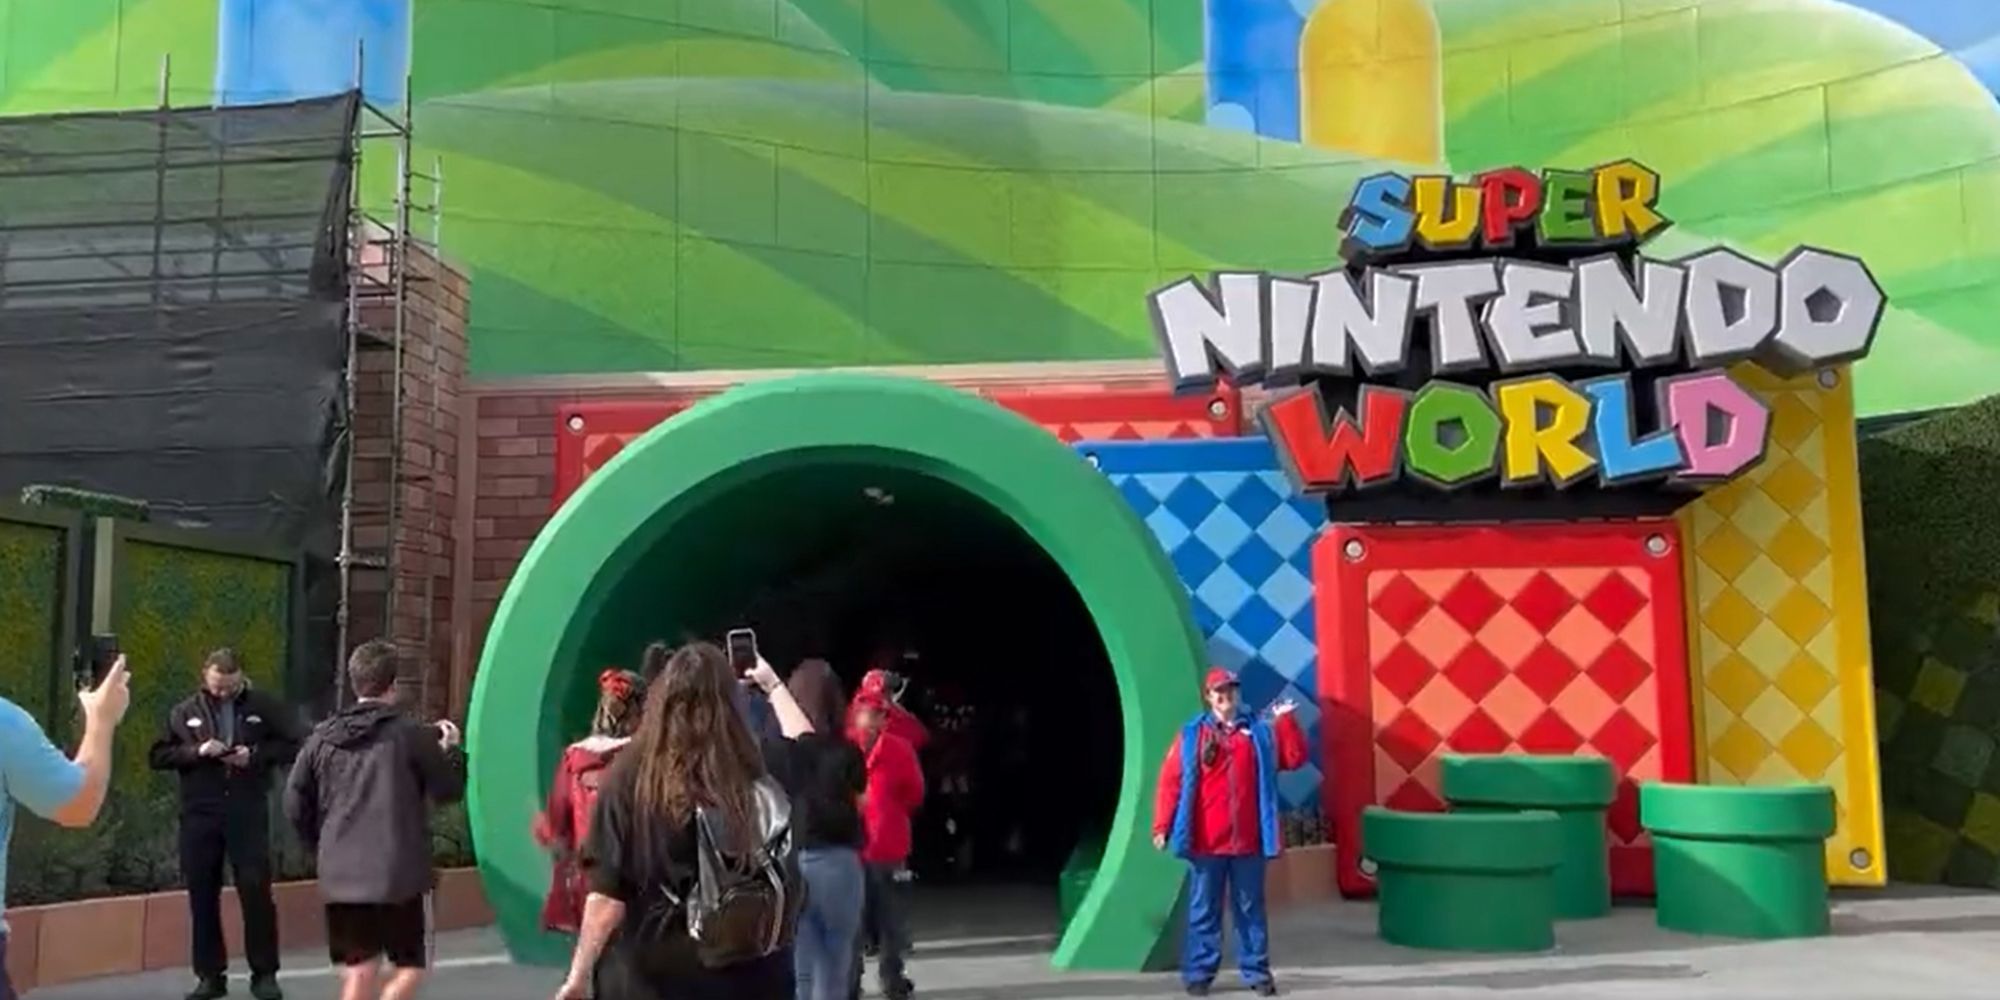 The Super Nintendo World entrance, showing visitors entering through a large green pipe with a colourful backdrop.